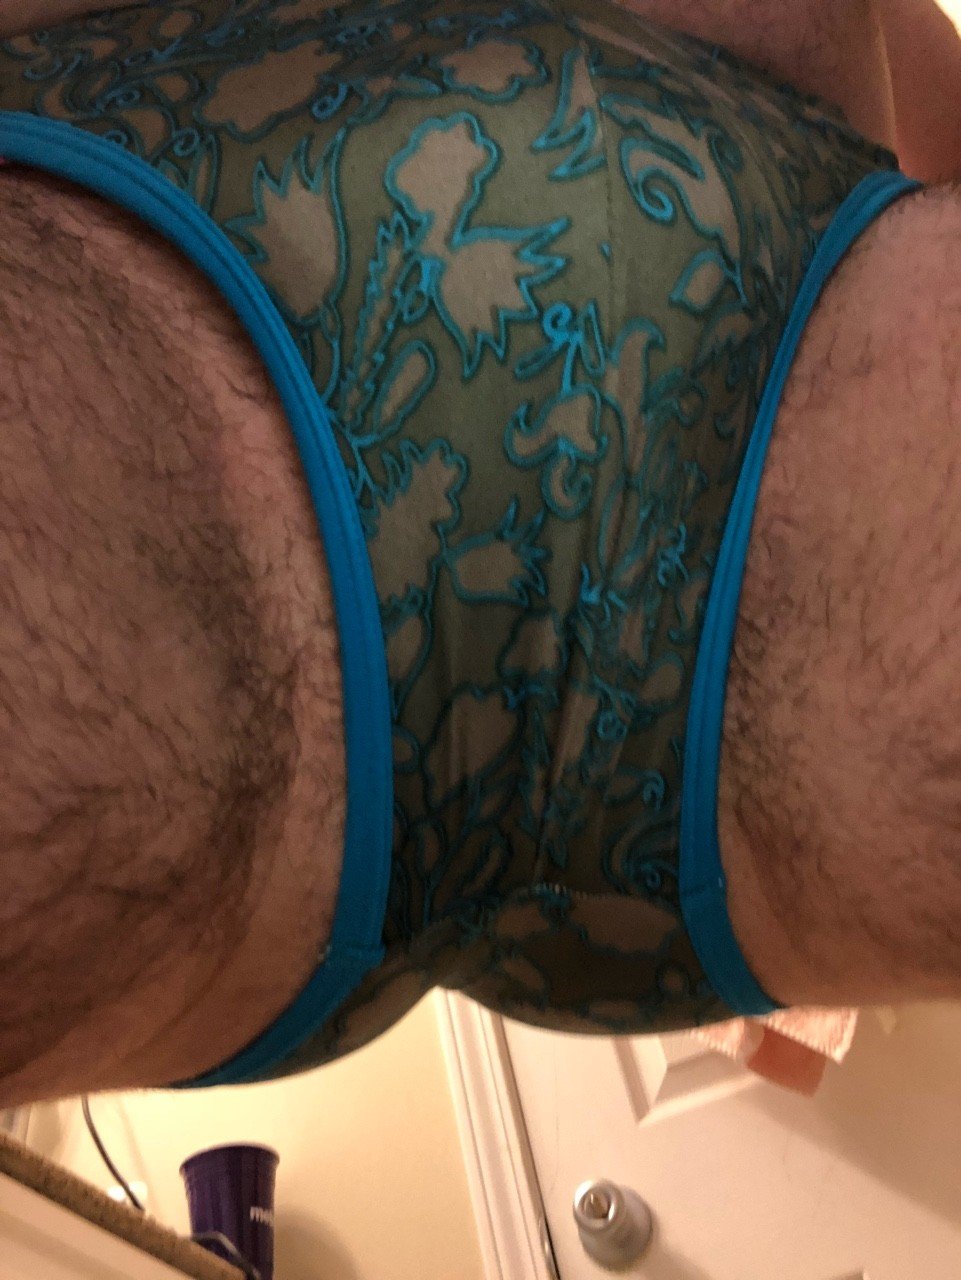 Photo by likesatl with the username @likesatl,  August 3, 2018 at 3:49 AM and the text says 'Some new ones. #meninpanties  #biseuxal  #atlanta  #who  #wants  #to  #join  #me  #please  #help  #wantmore  #solo  #male'